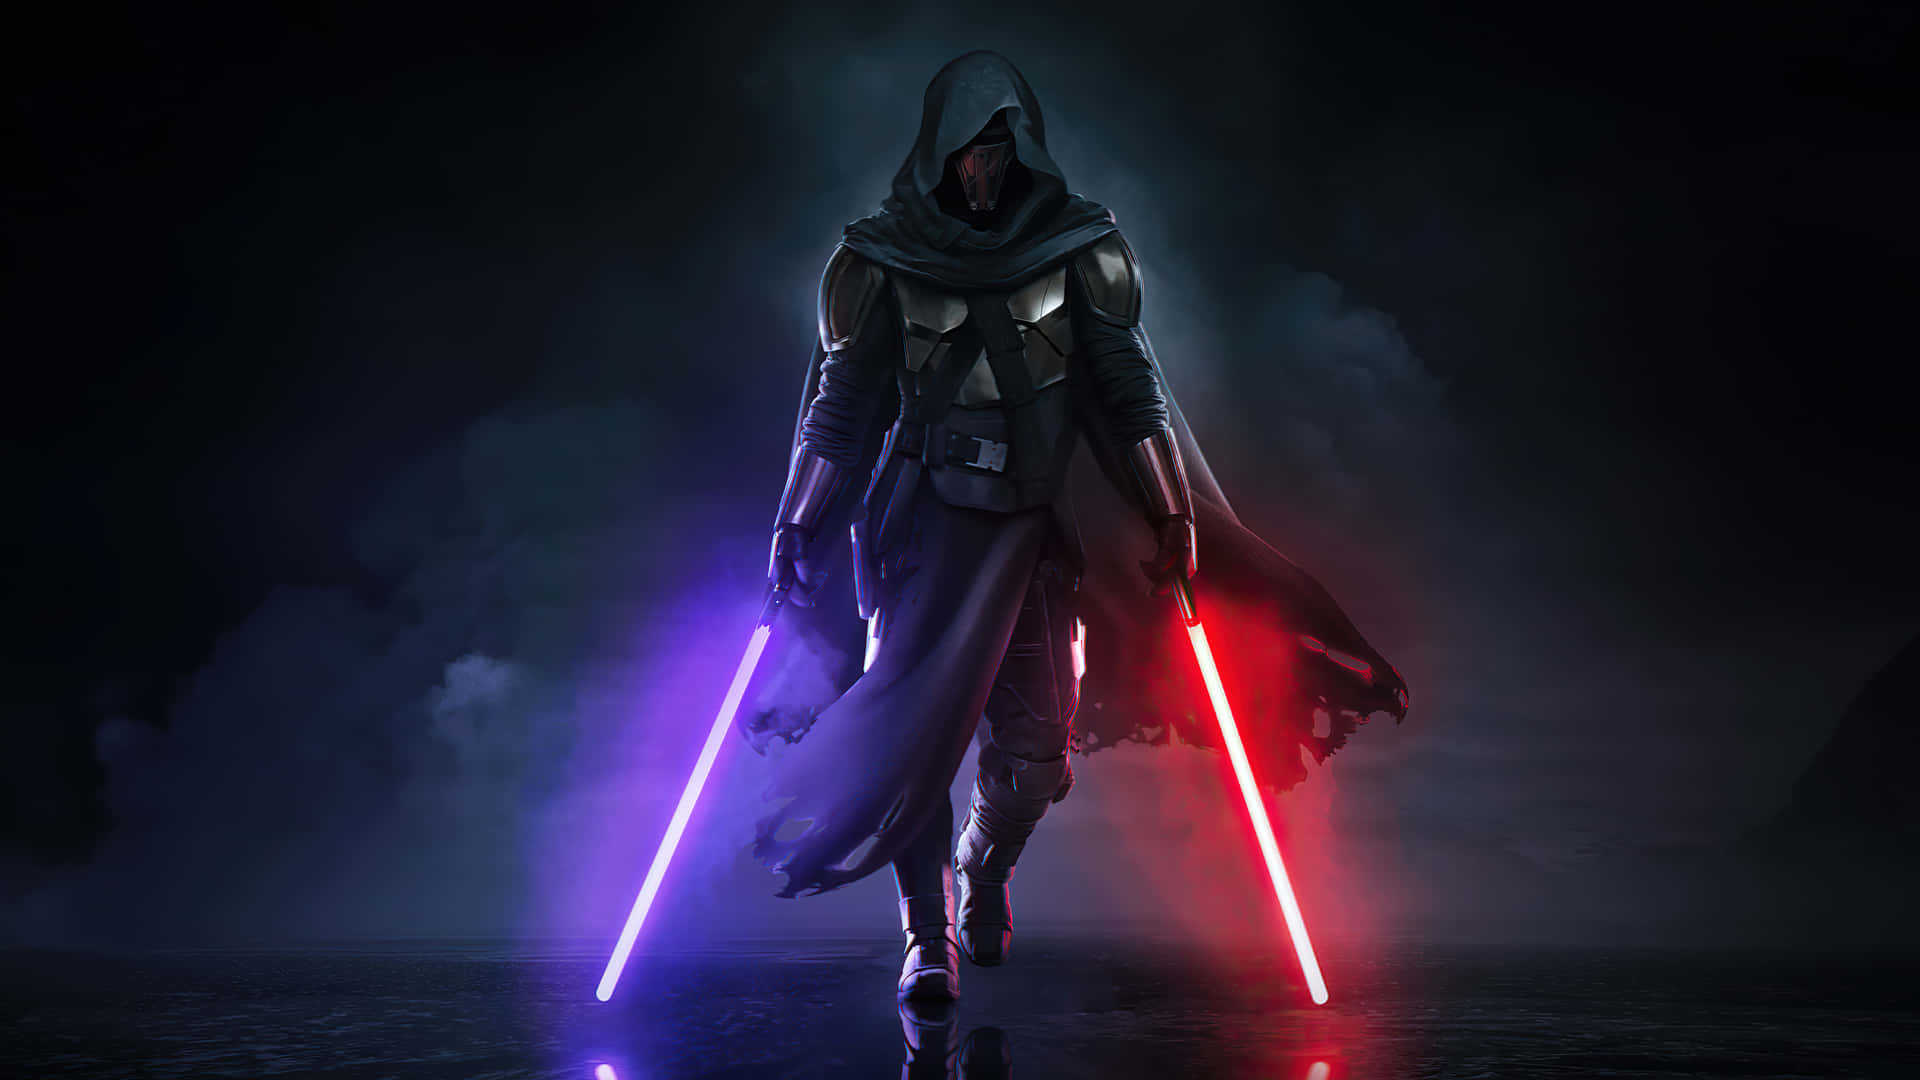 Unstoppable Sith Lord Darth Revan Wallpaper